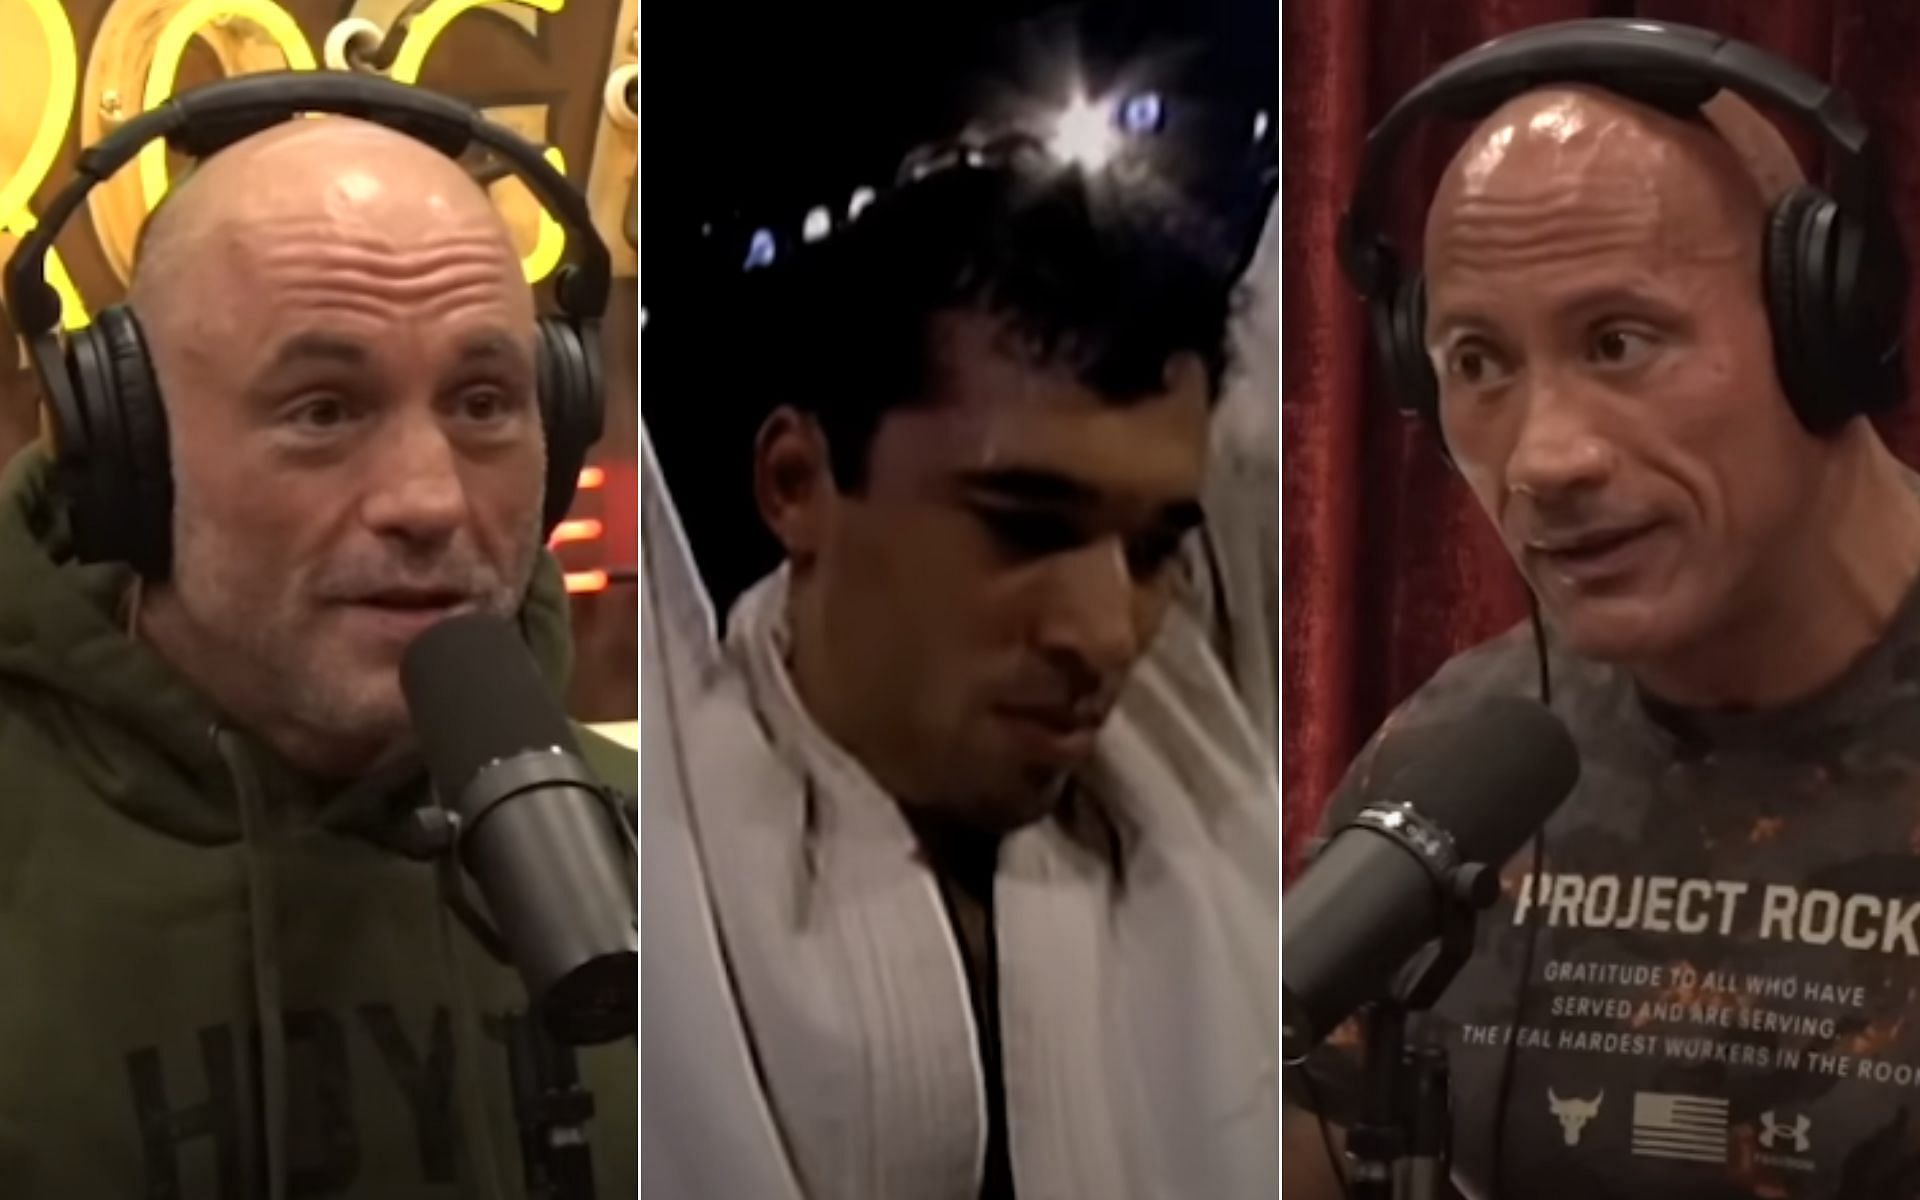 Joe Rogan [Left], Royce Gracie at UFC 1 [Middle], and The Rock [Right] [Photo credit: PowerfulJRE and UFC - YouTube]